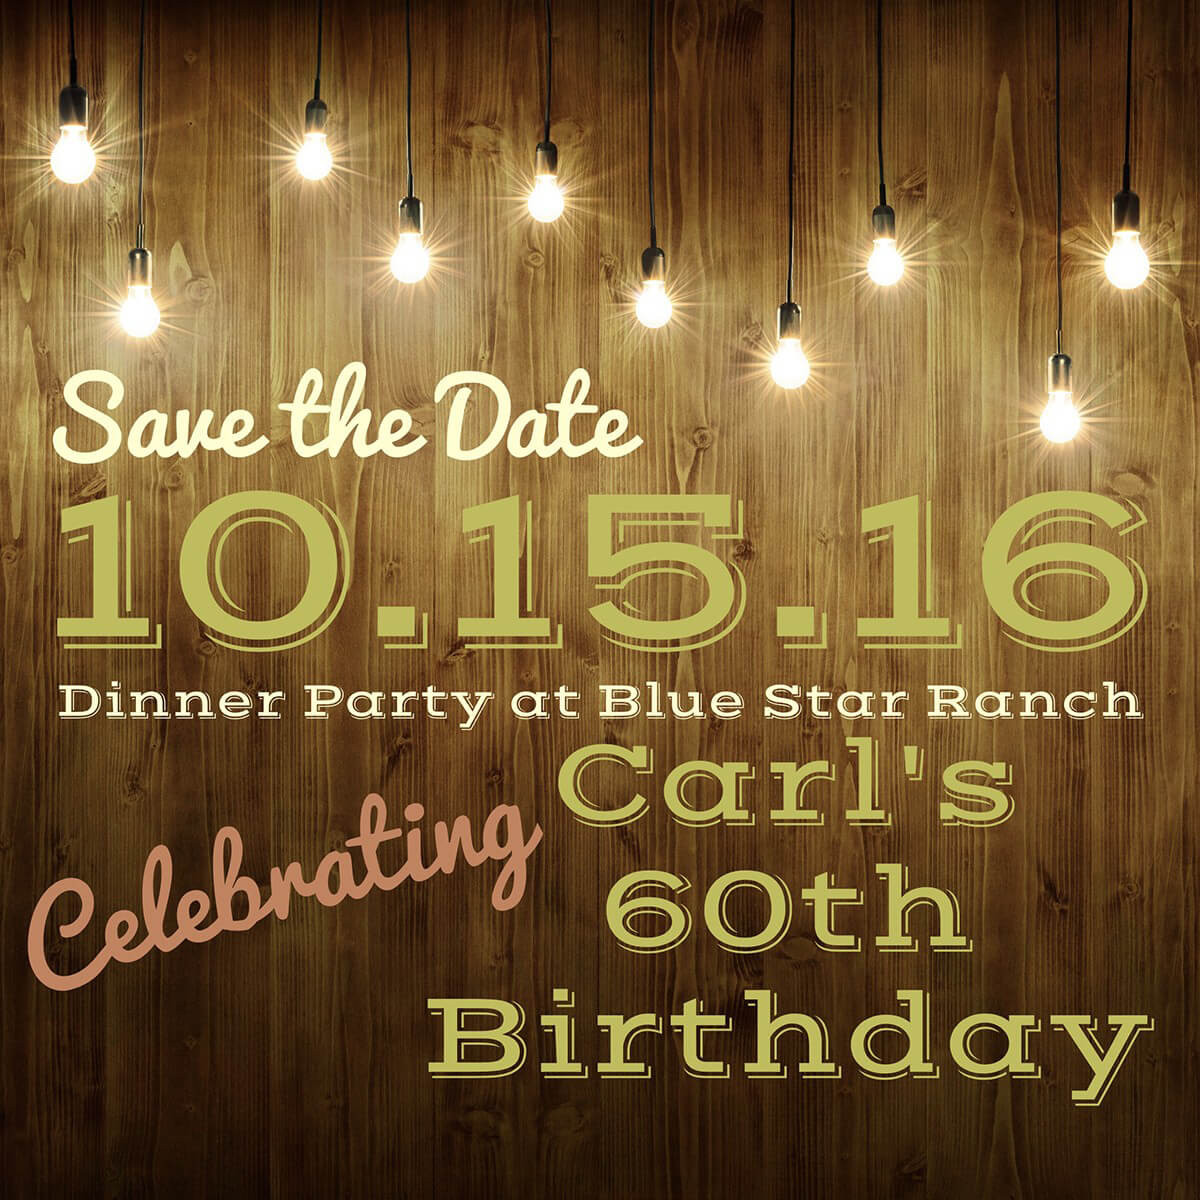 Create Birthday Invitations
 Make Your Own Birthday Invitations for Free